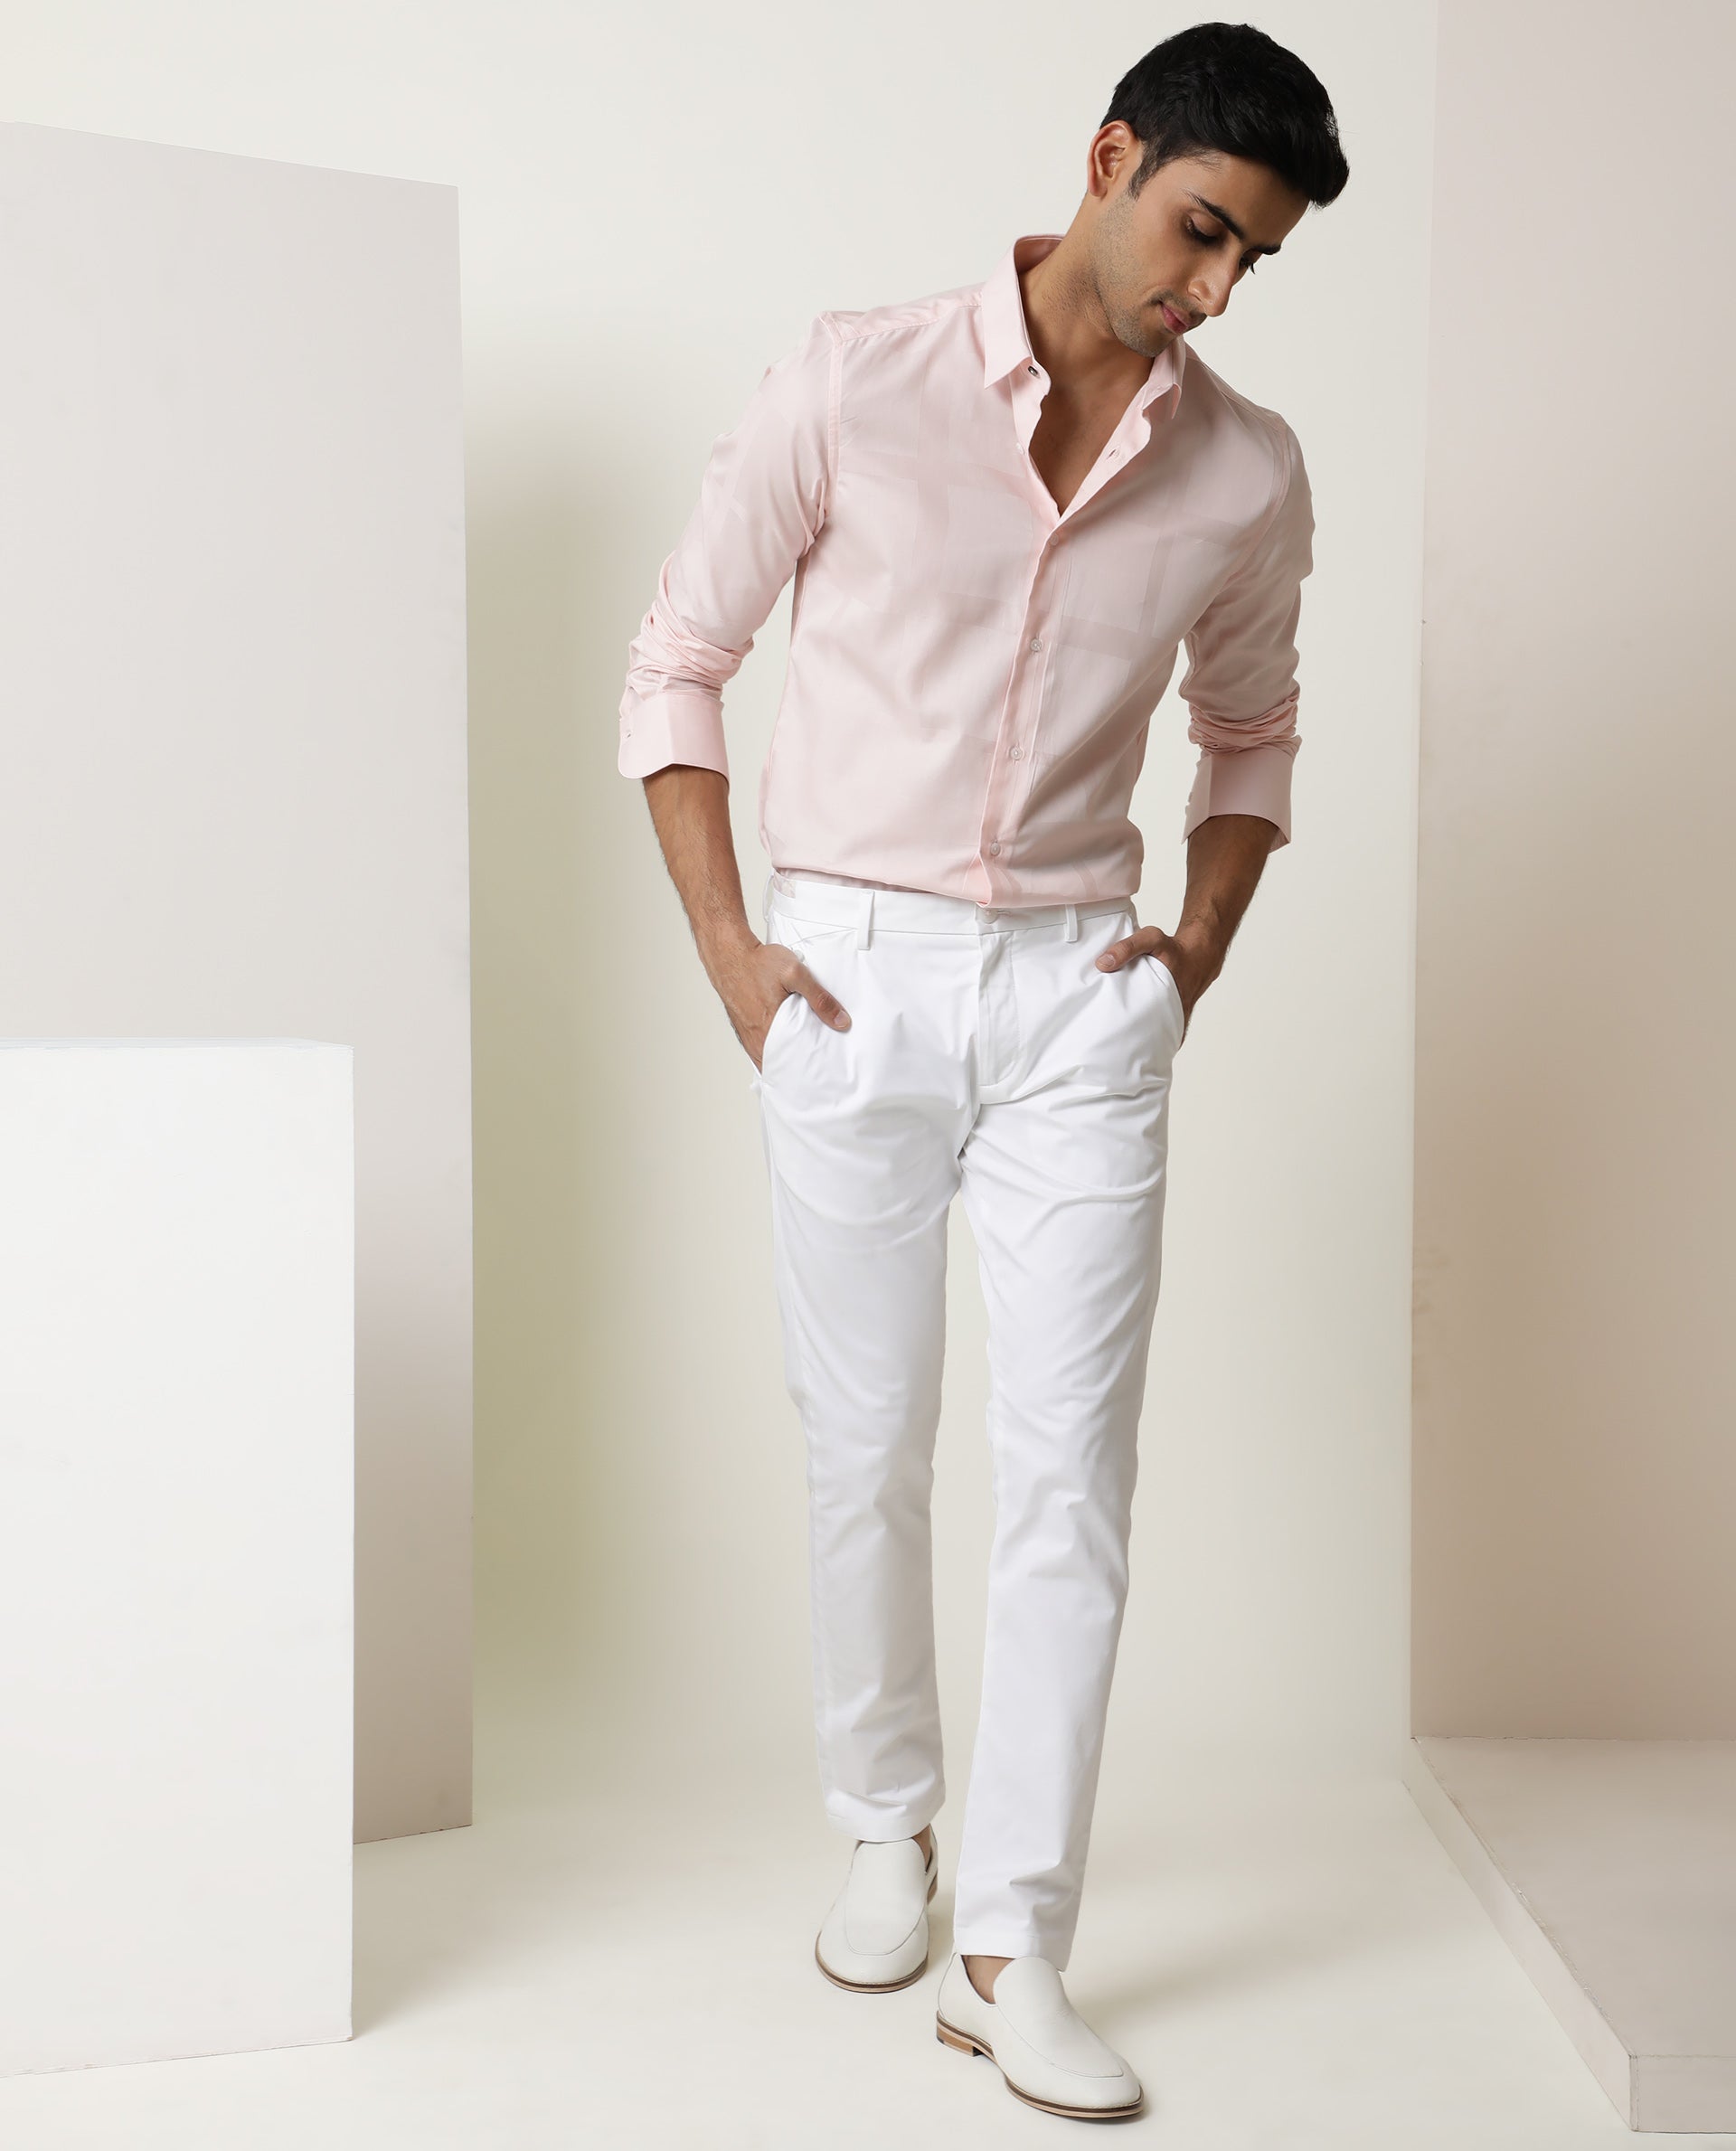 40 White Shirt Outfit Ideas for Men  Styling Tips  White shirt outfits  Shirt and pants combinations for men Shirt outfit men